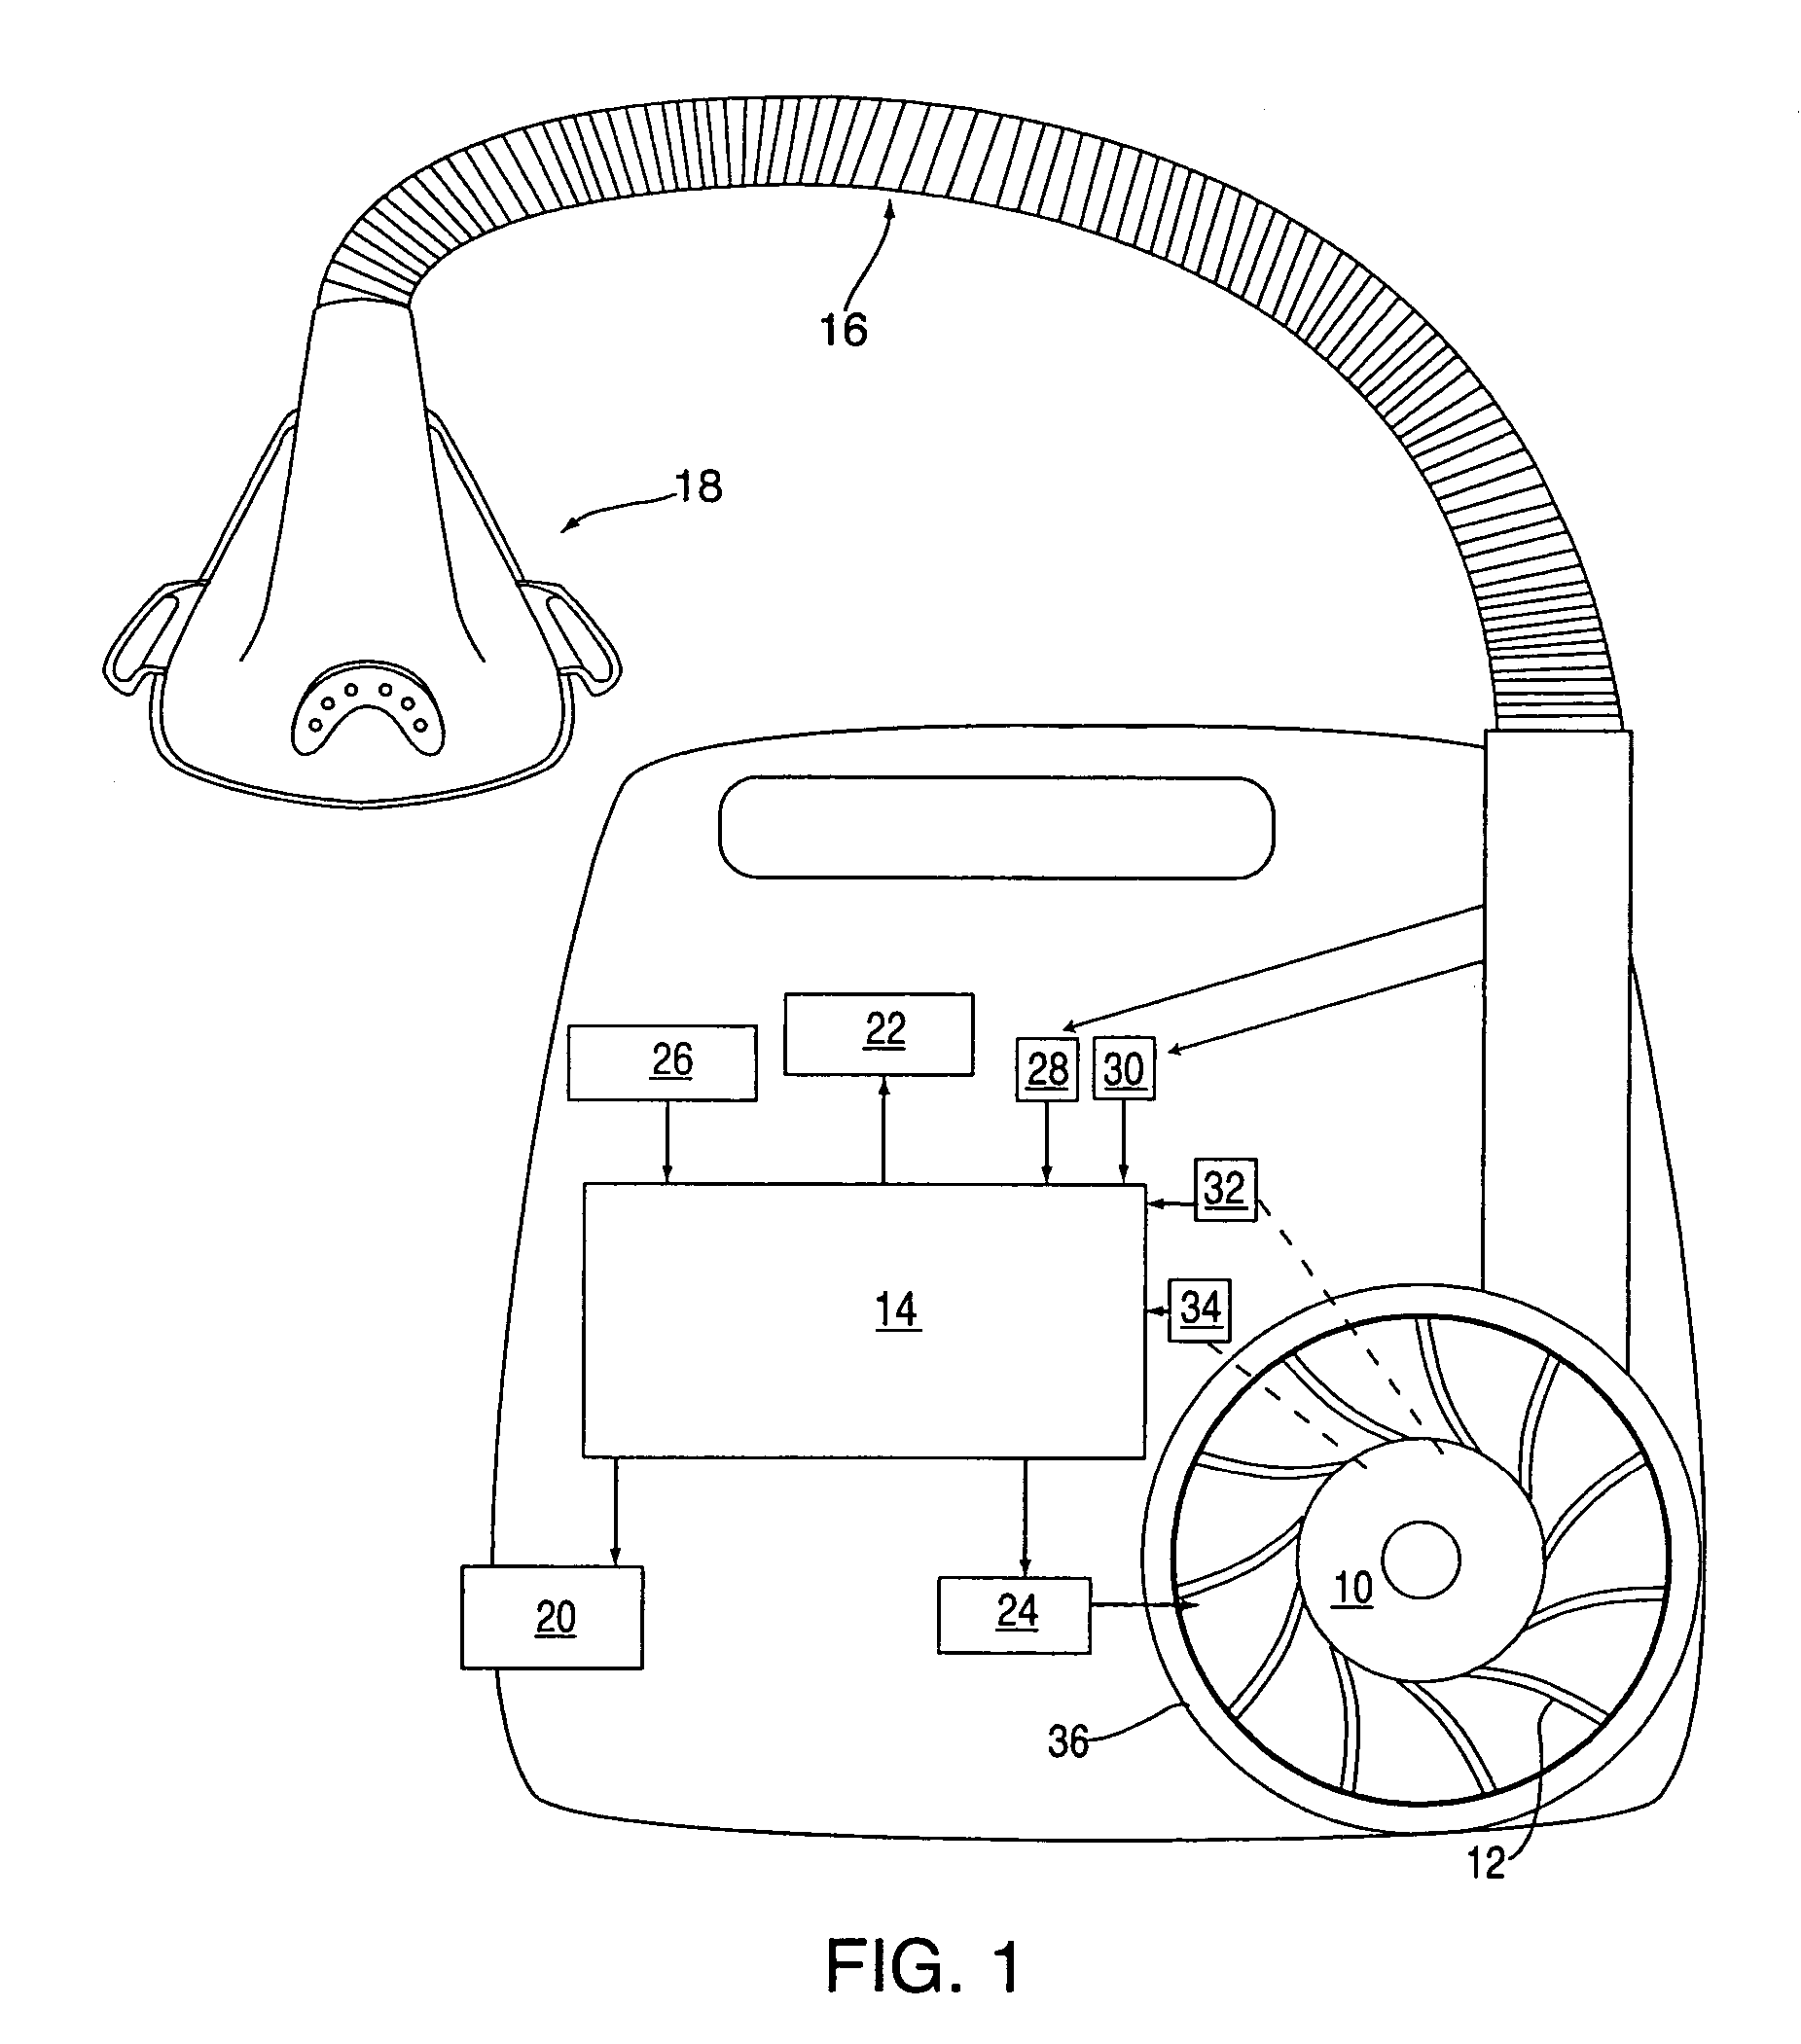 Method and apparatus for improving the comfort of CPAP